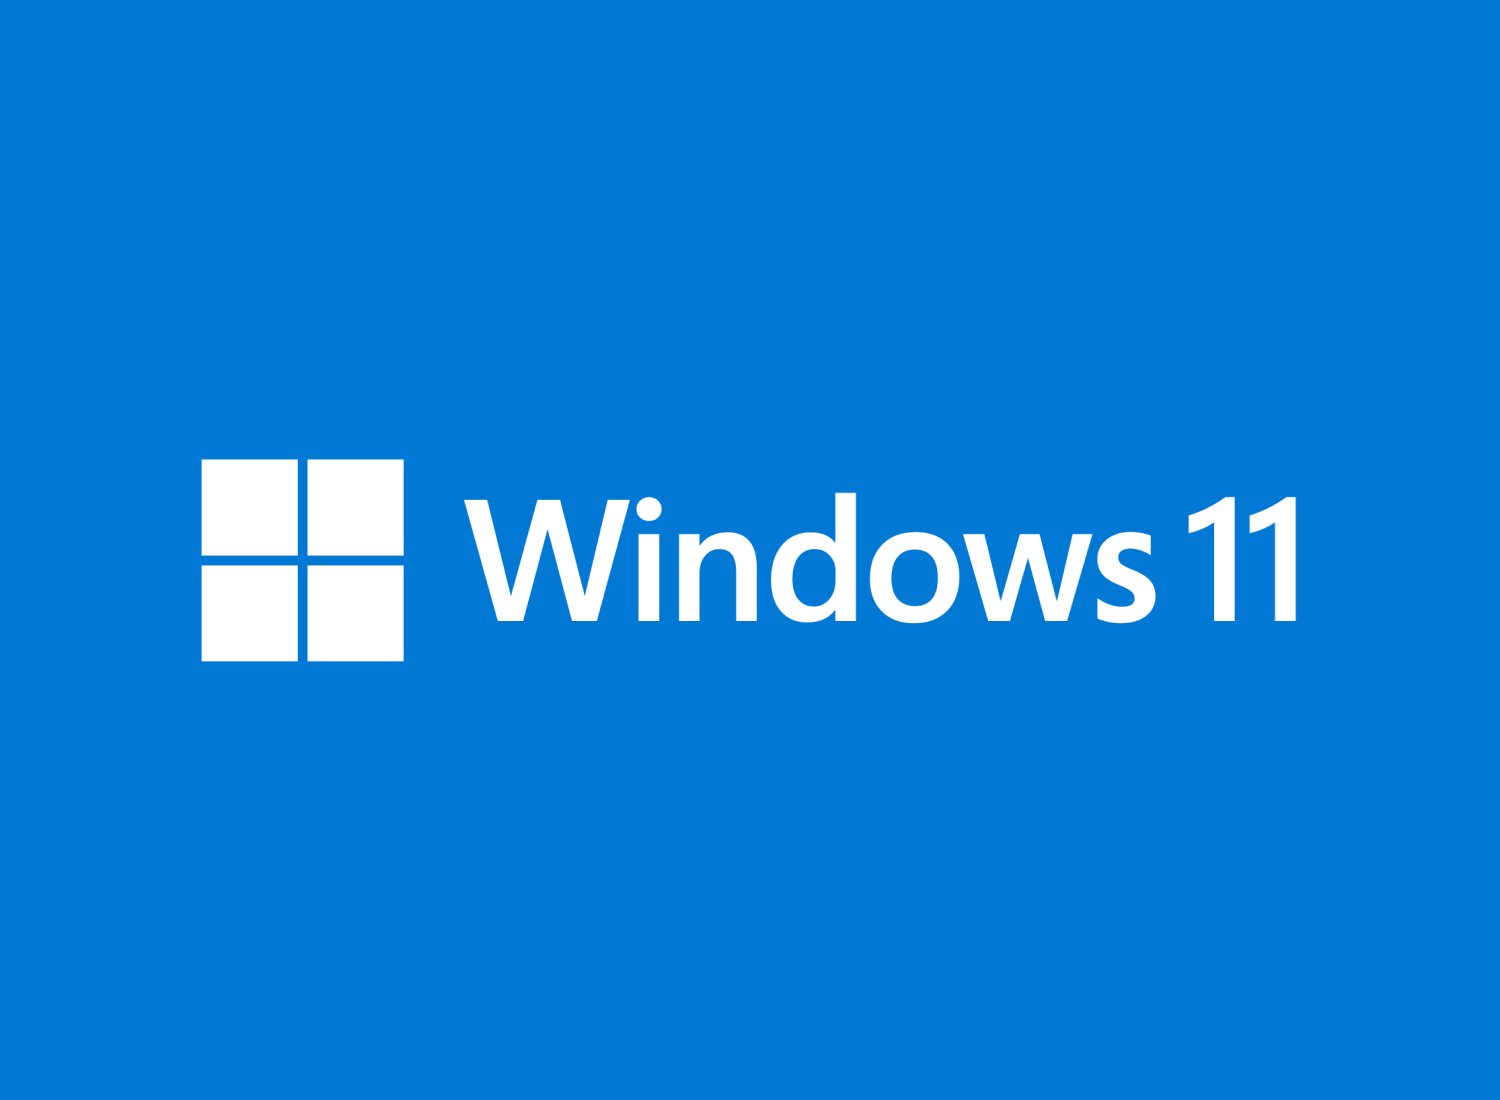 Announcing Windows 11 Insider Preview Build 22621.586 and 22622.586